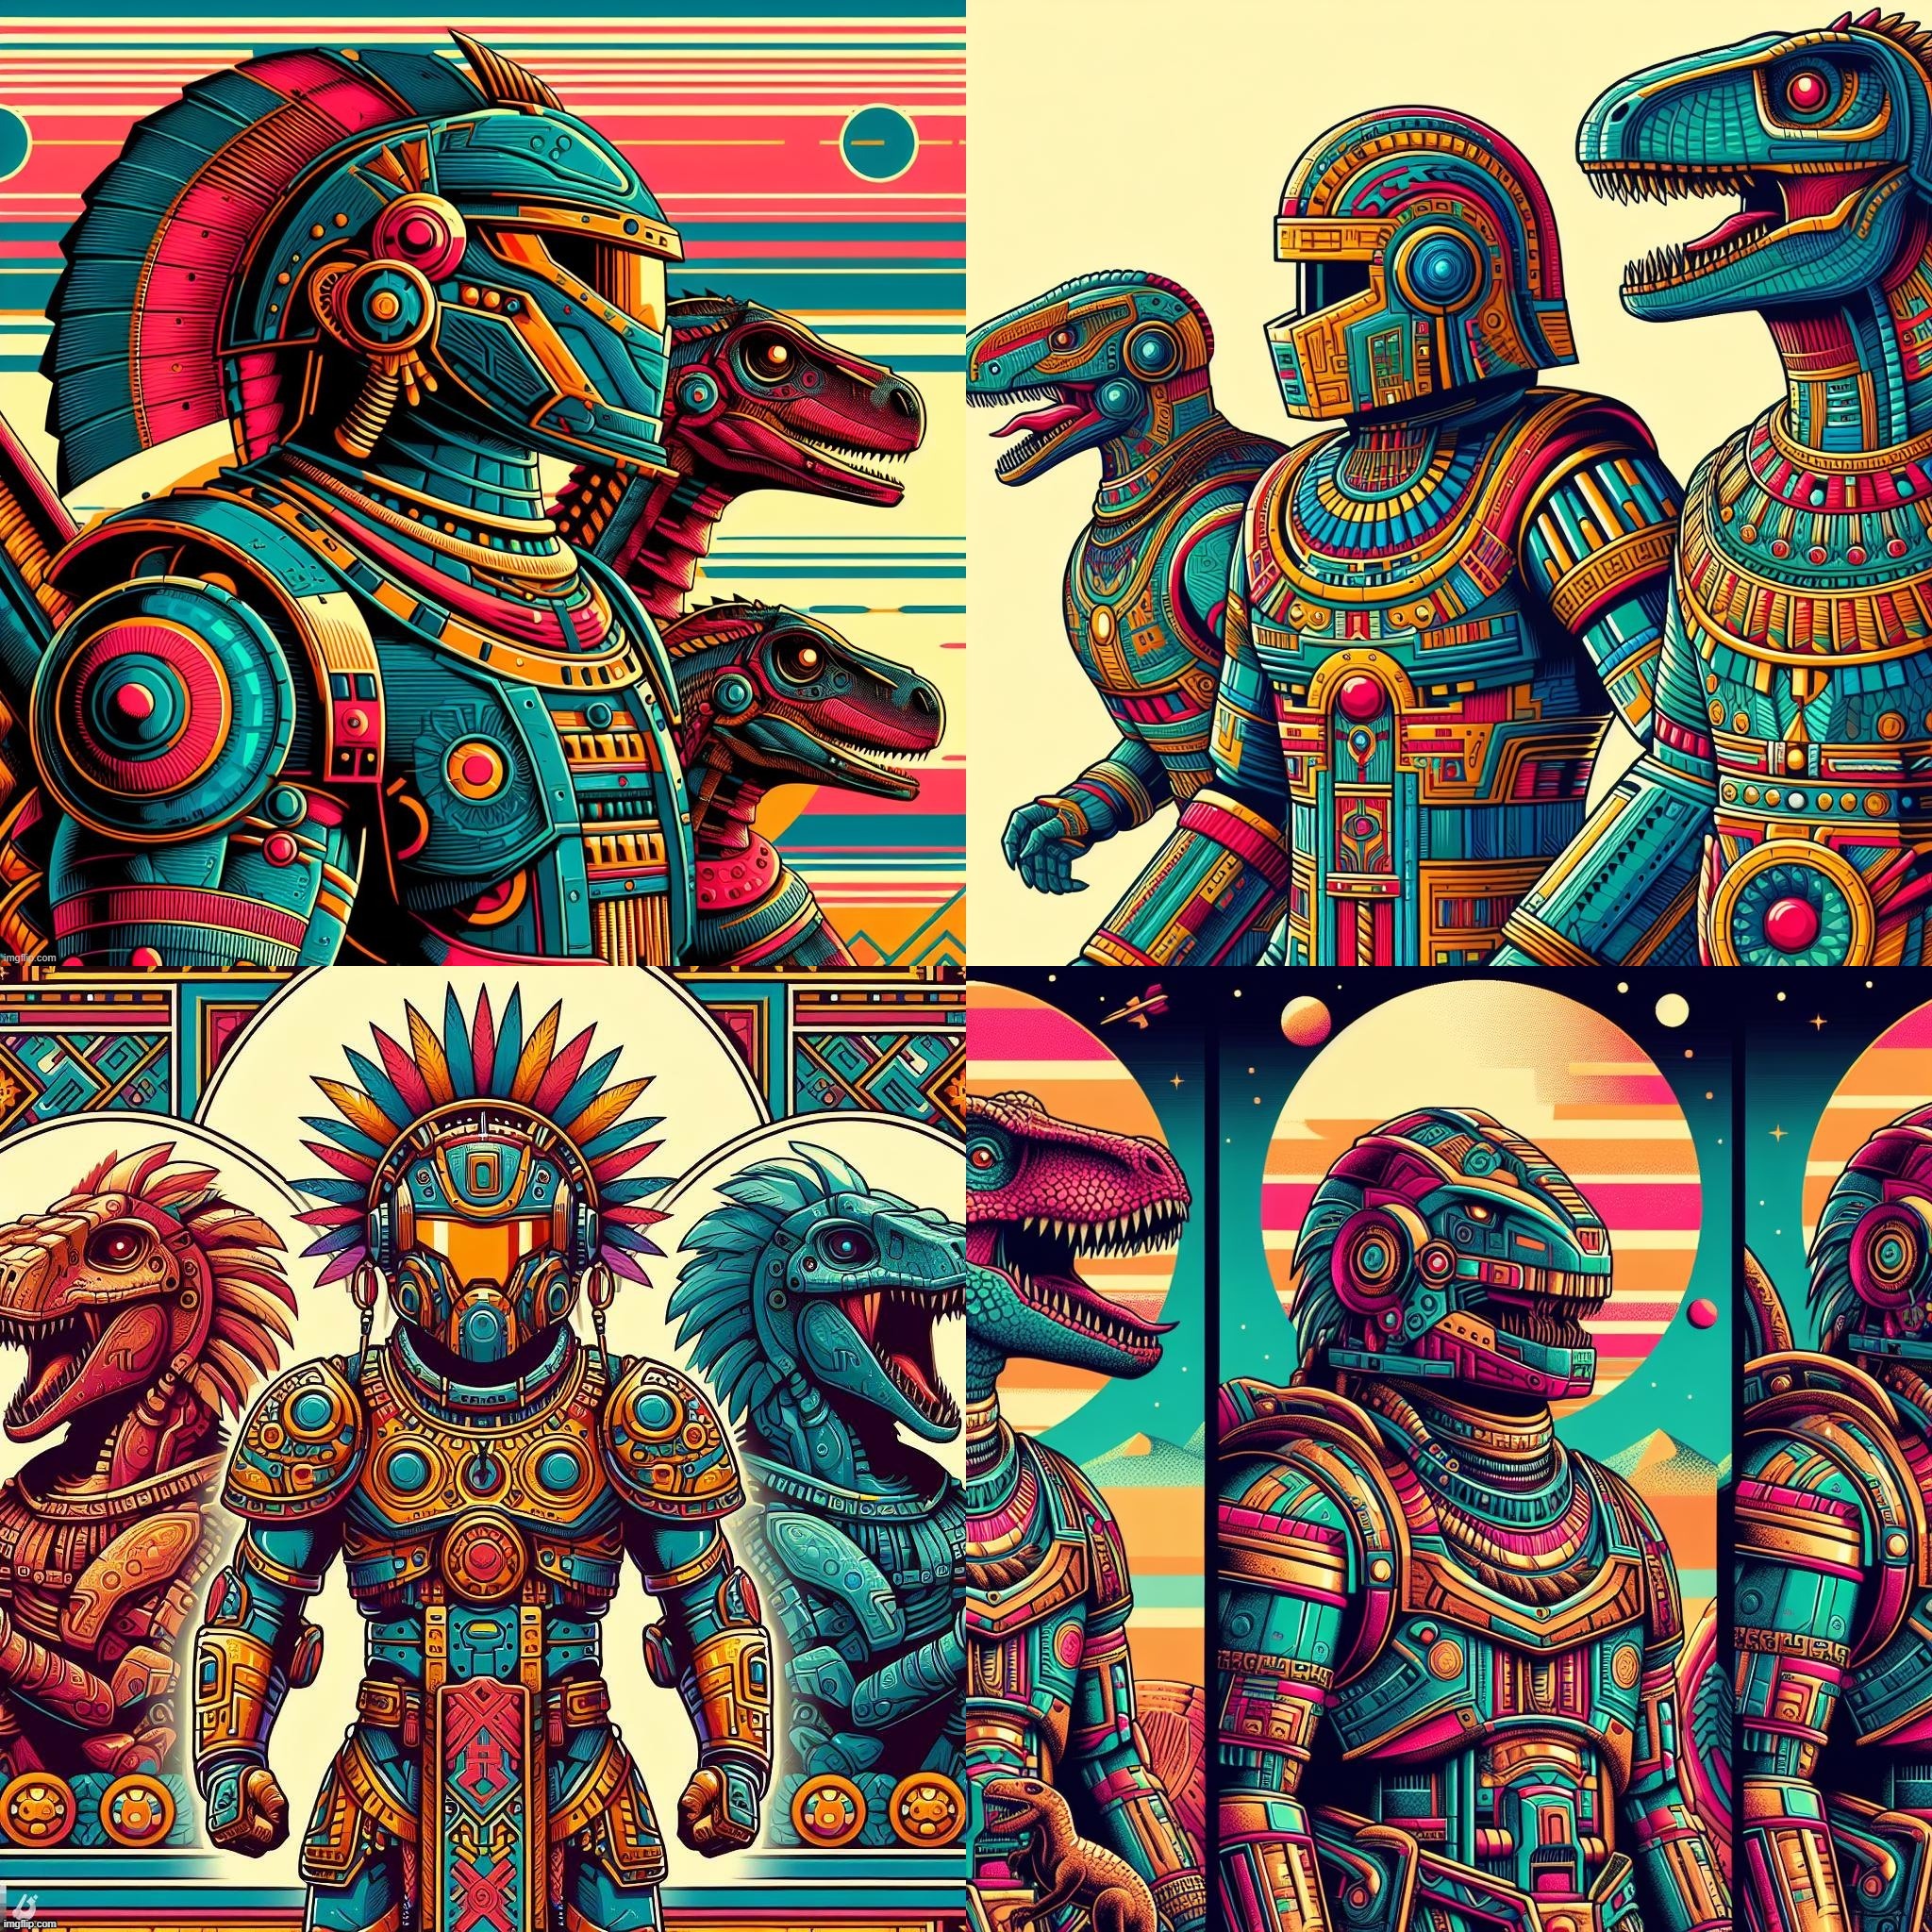 AI Bing: Retro Futuristic MesoAmerican, Mesopotamian, and Mesozoic themed armor worn by humanoid dinosaurs. So 90's. | image tagged in ai generated,dinosaurs,mesopotamian,mesoamerican,retro,armor | made w/ Imgflip meme maker